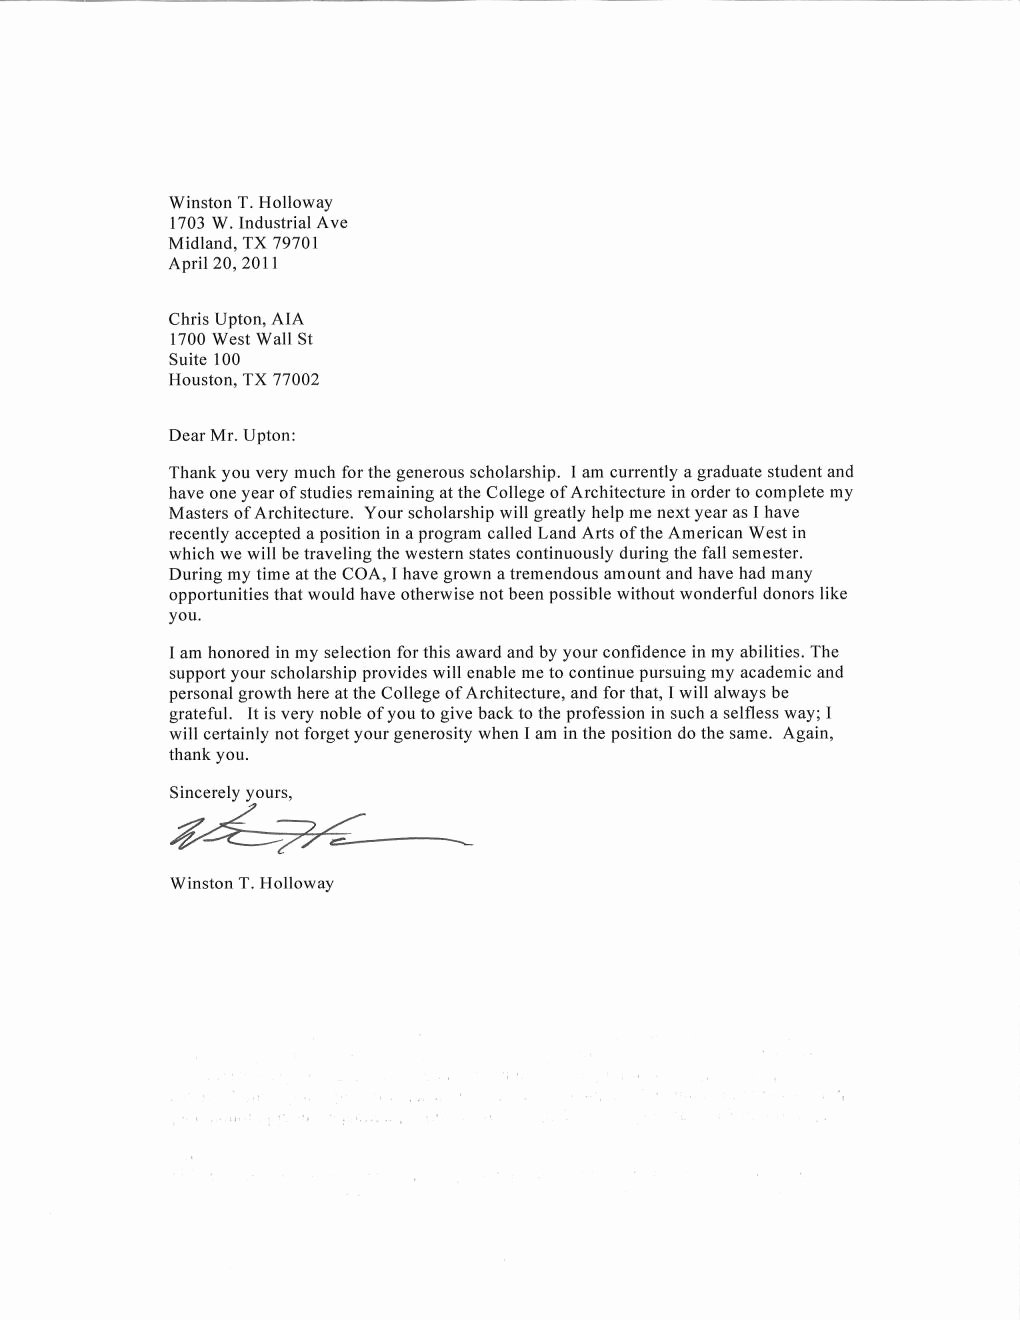 Scholarship Thank You Letter Template New Aia West Texas West Texas Chapter Aia 2011 Scholarship